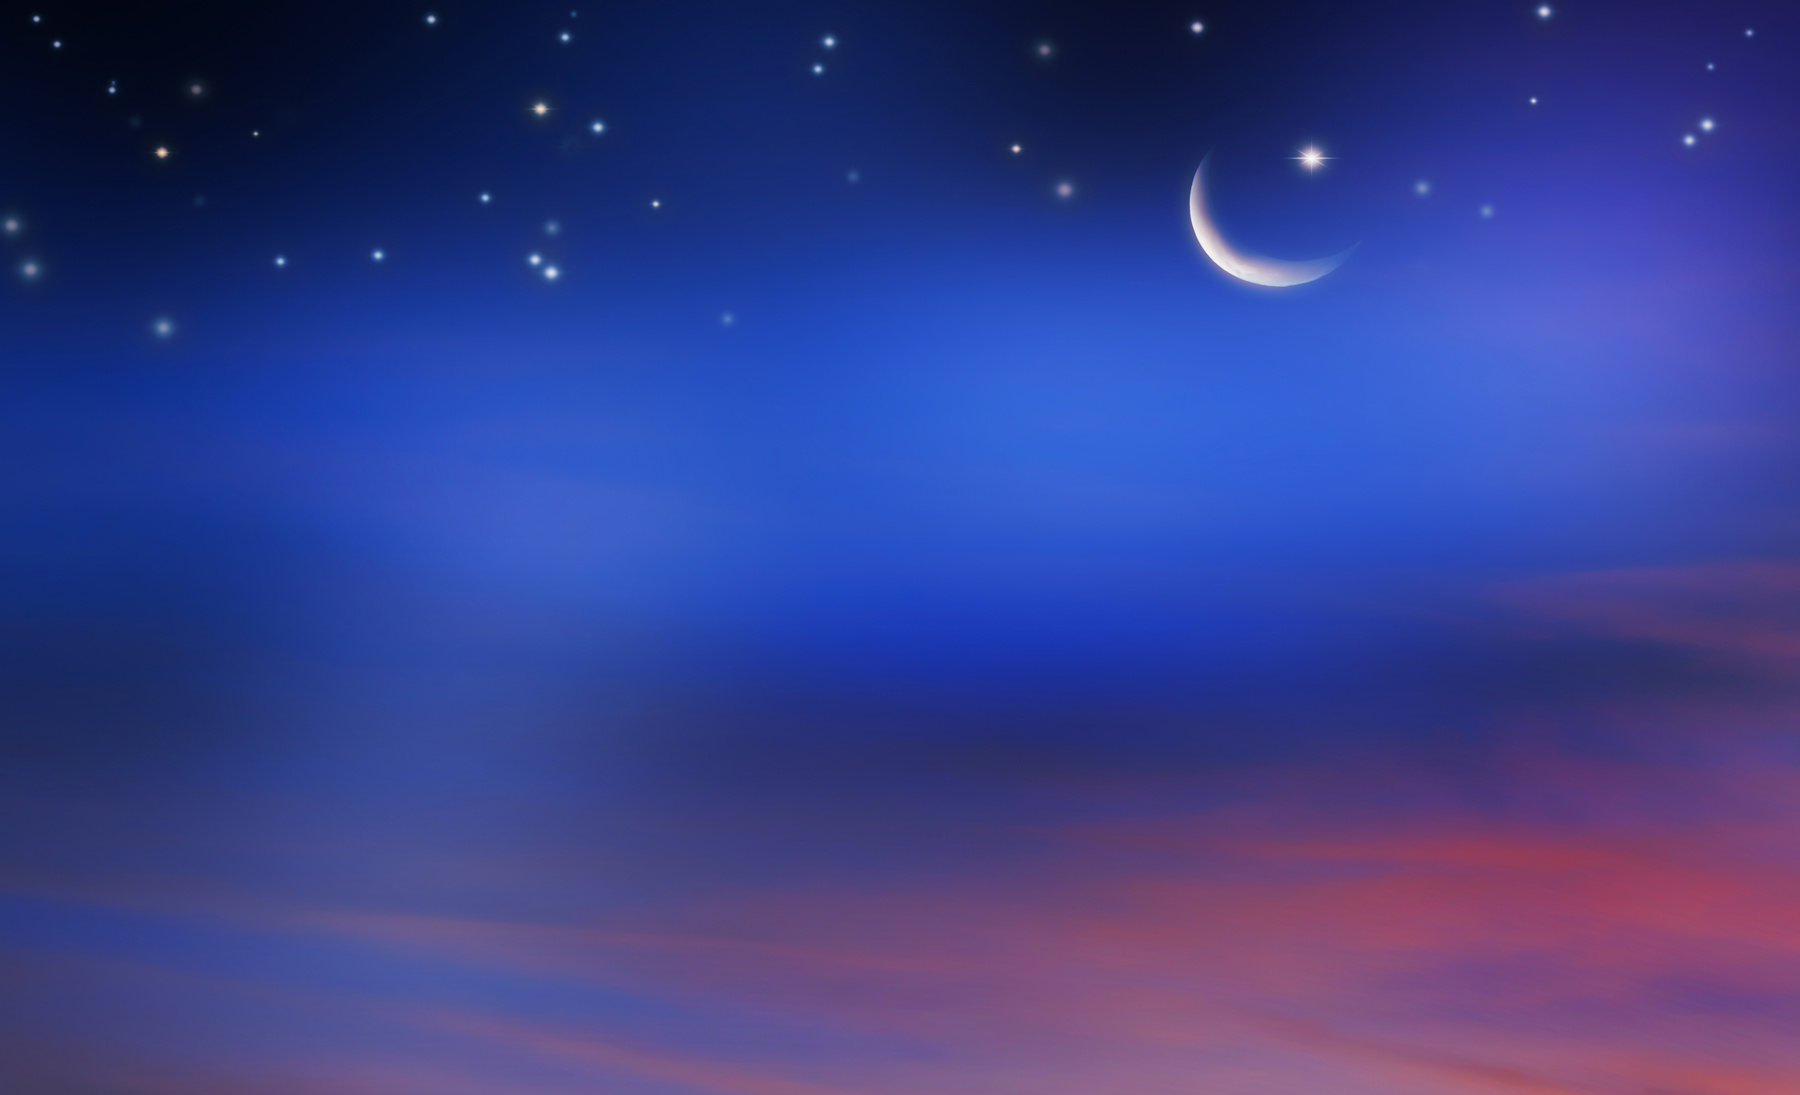 crescent and stars on night sky background